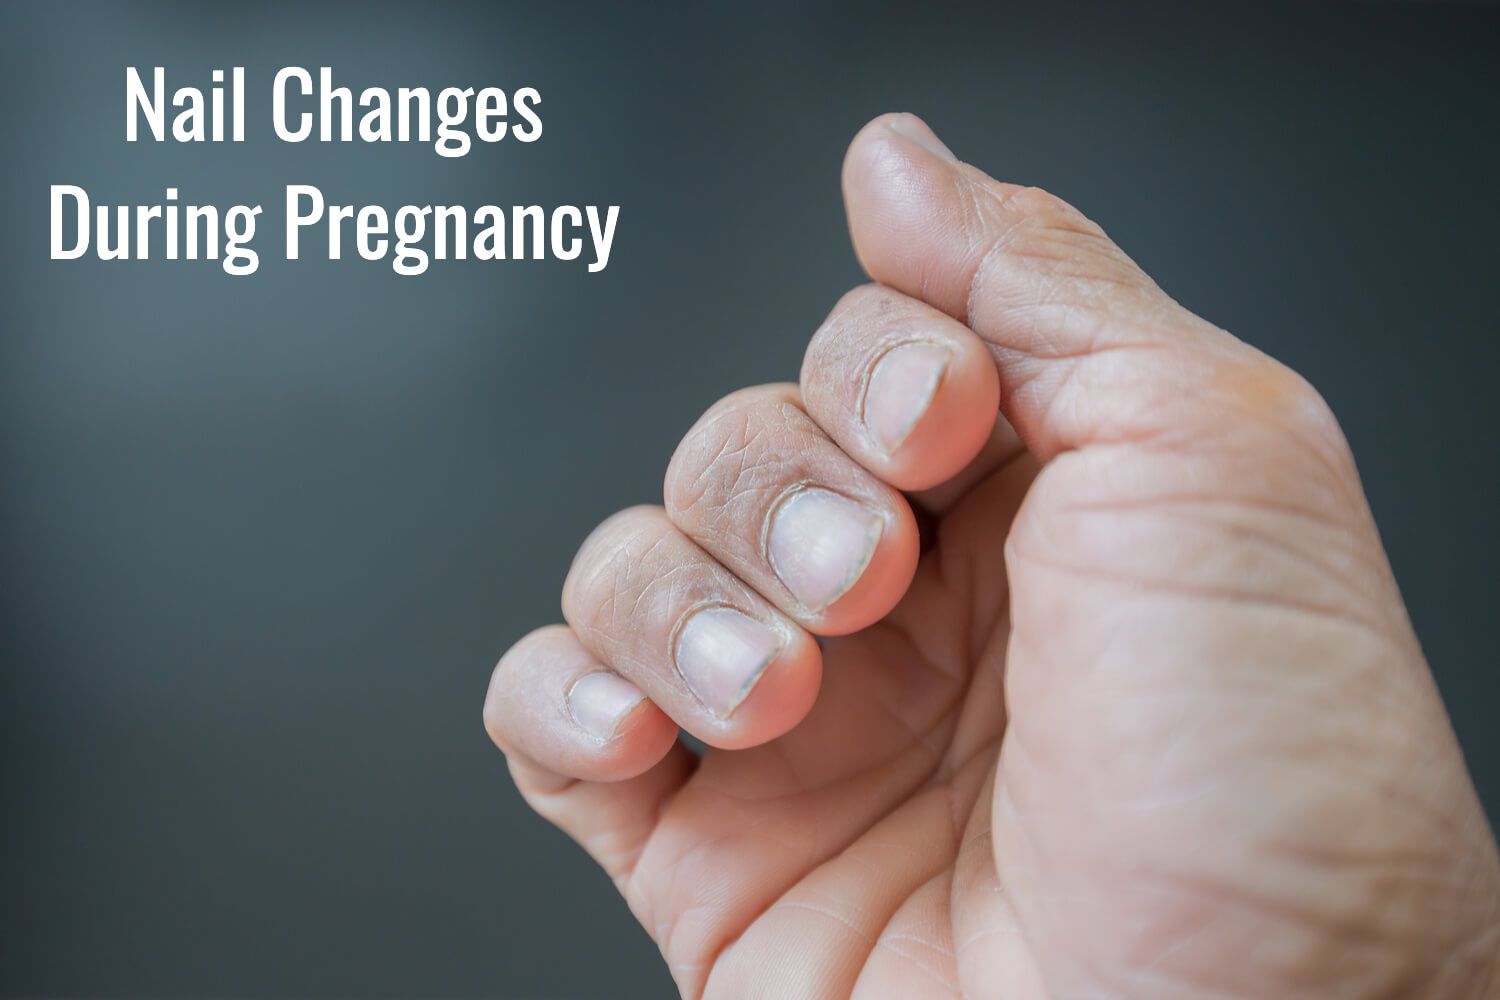 Nail Changes During Pregnancy - Causes and Treatment - Being The Parent